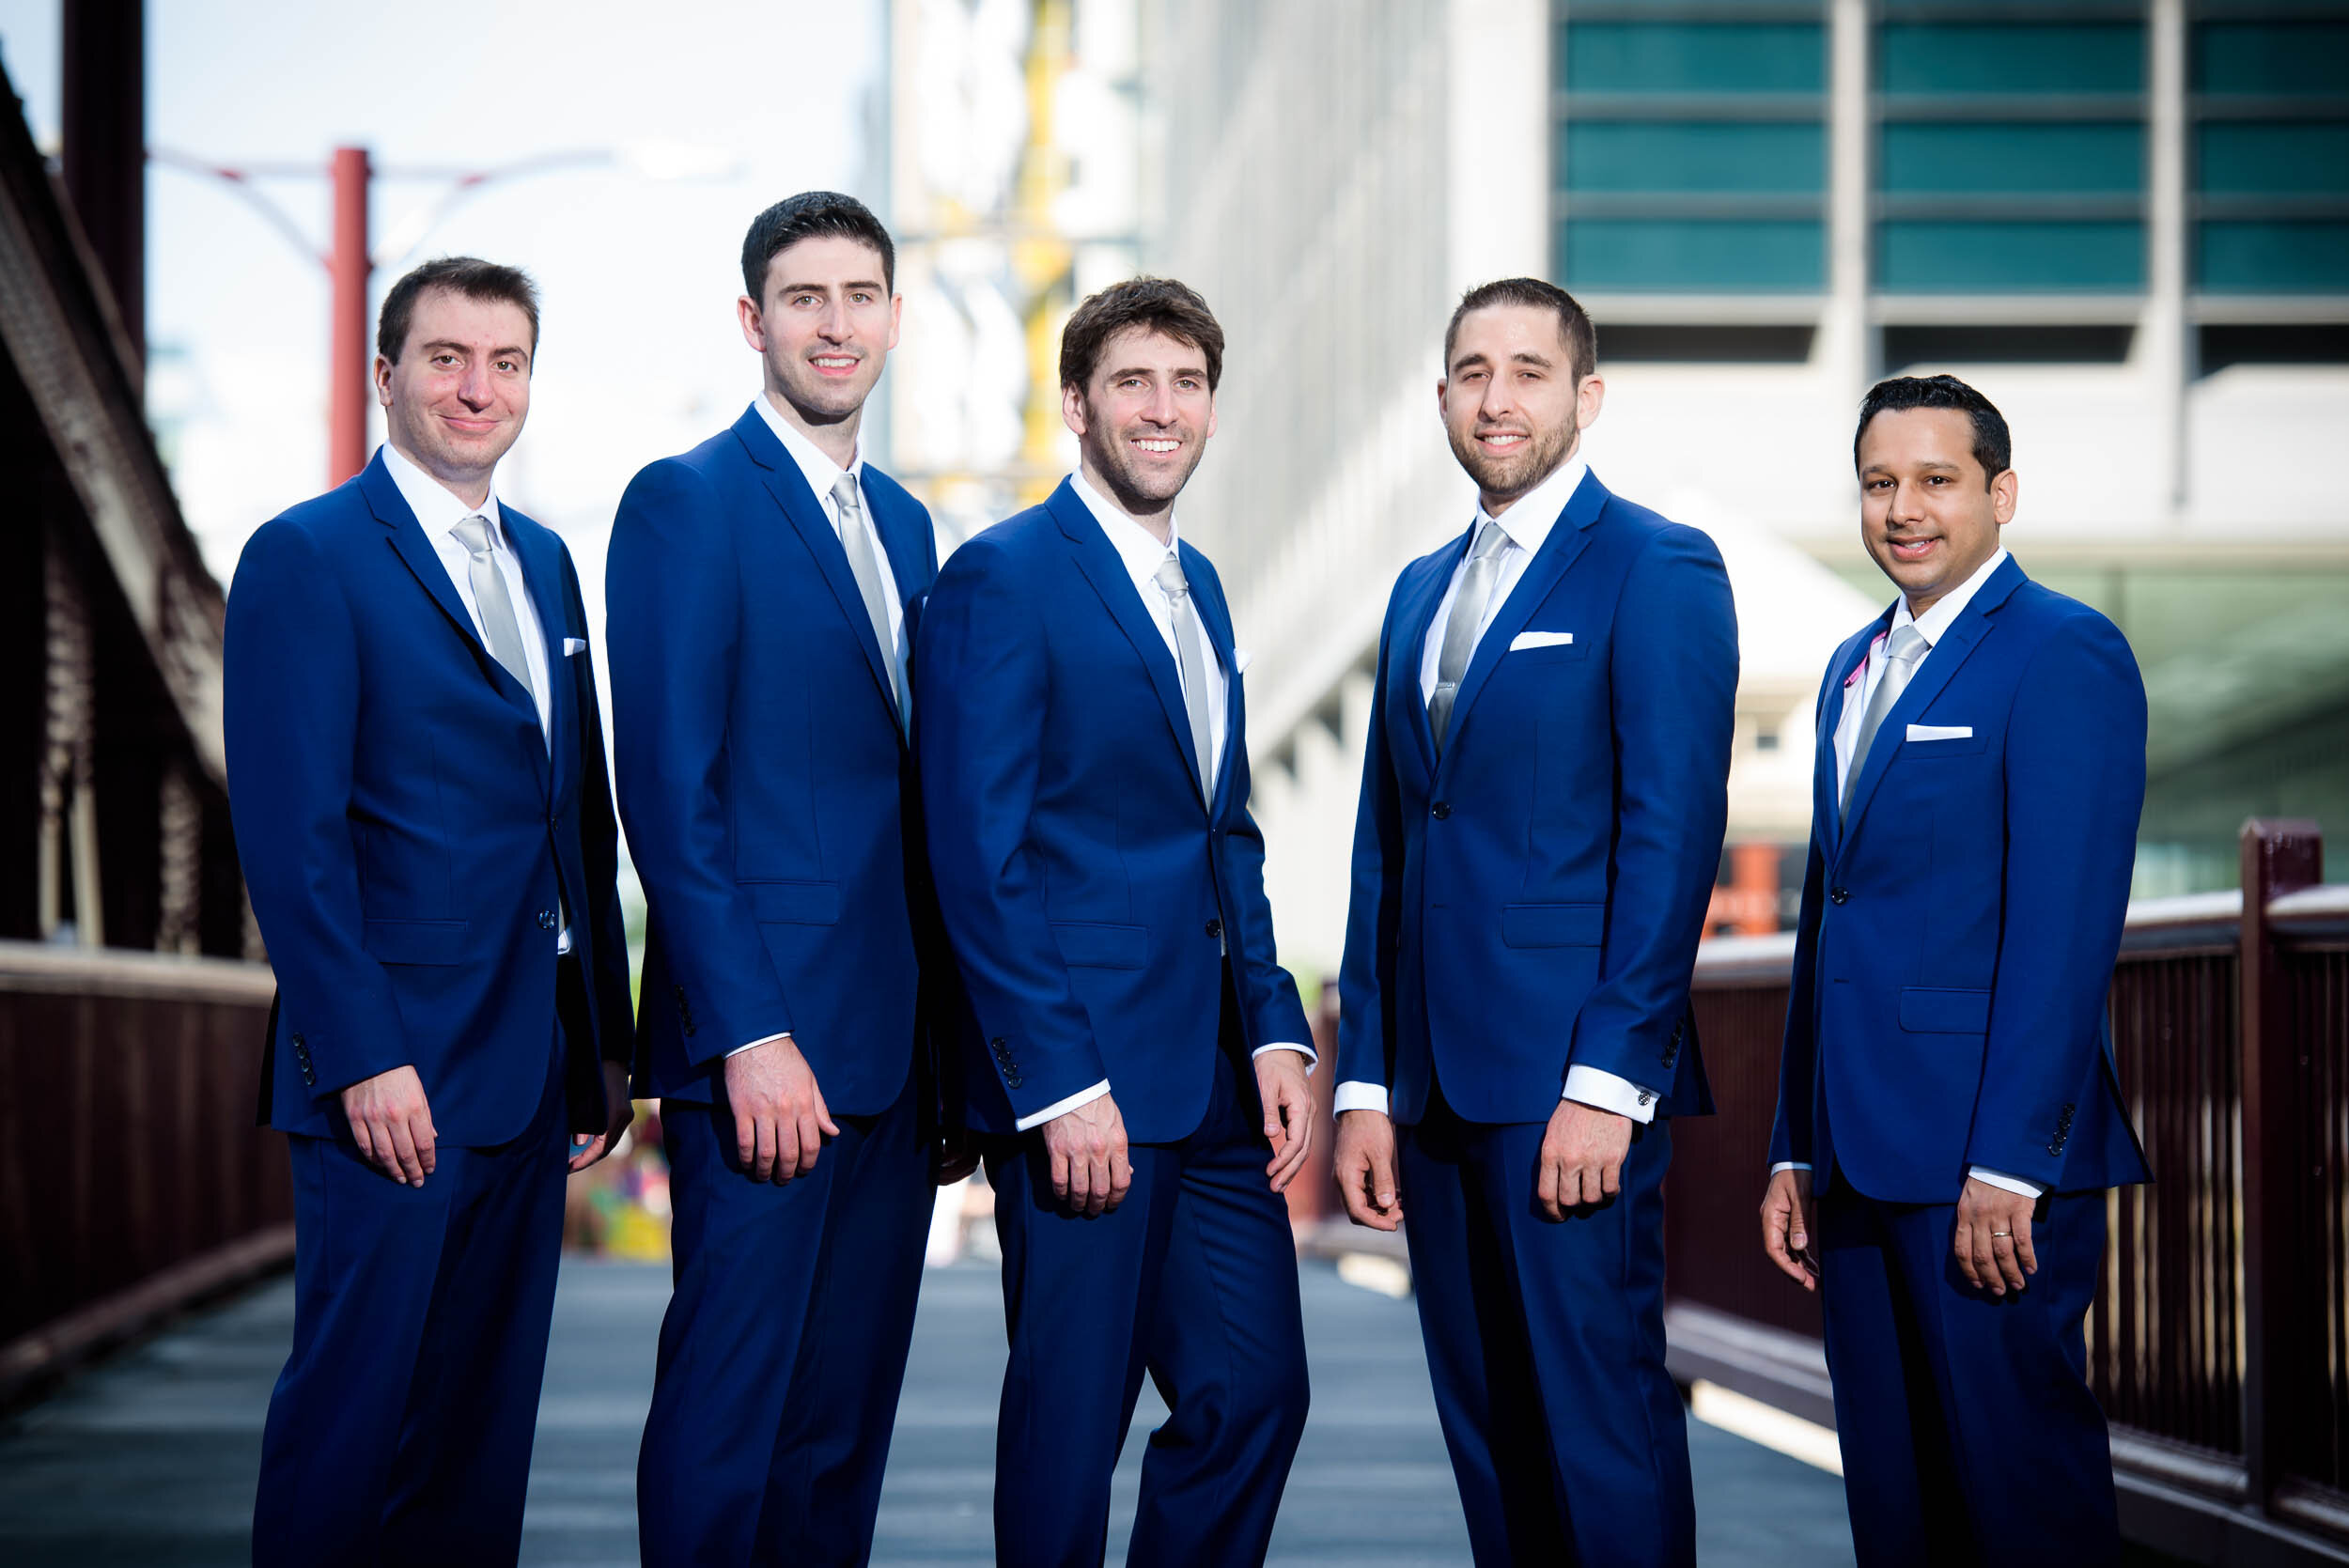 Groomsmen portrait on the Chicago River: Ravenswood Event Center Chicago wedding captured by J. Brown Photography.  